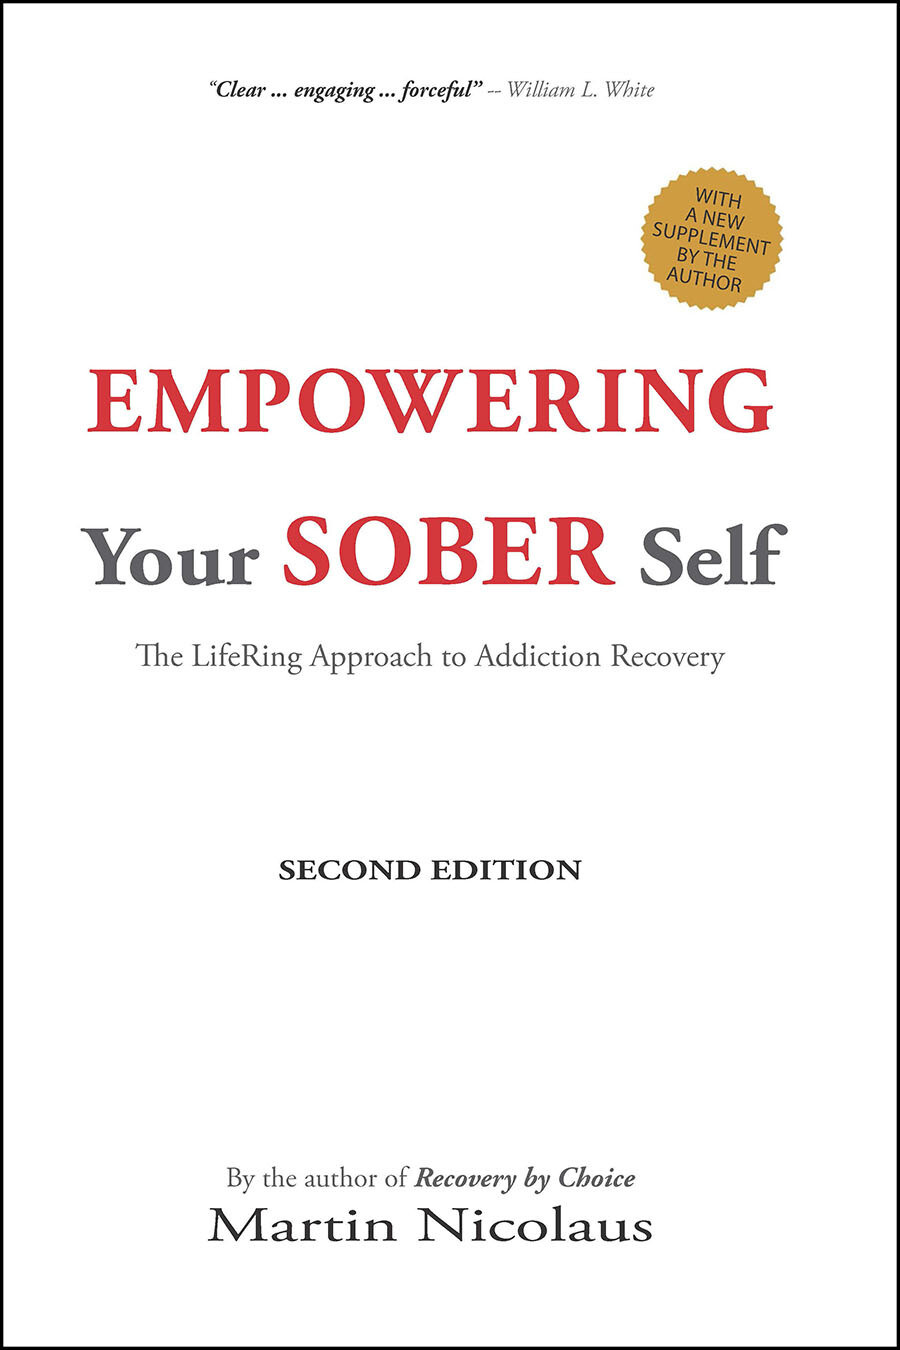 Impage of Book: Empowering Your Sober Self is a great read if you're looking for a powerful alternative to 12-steps programs.